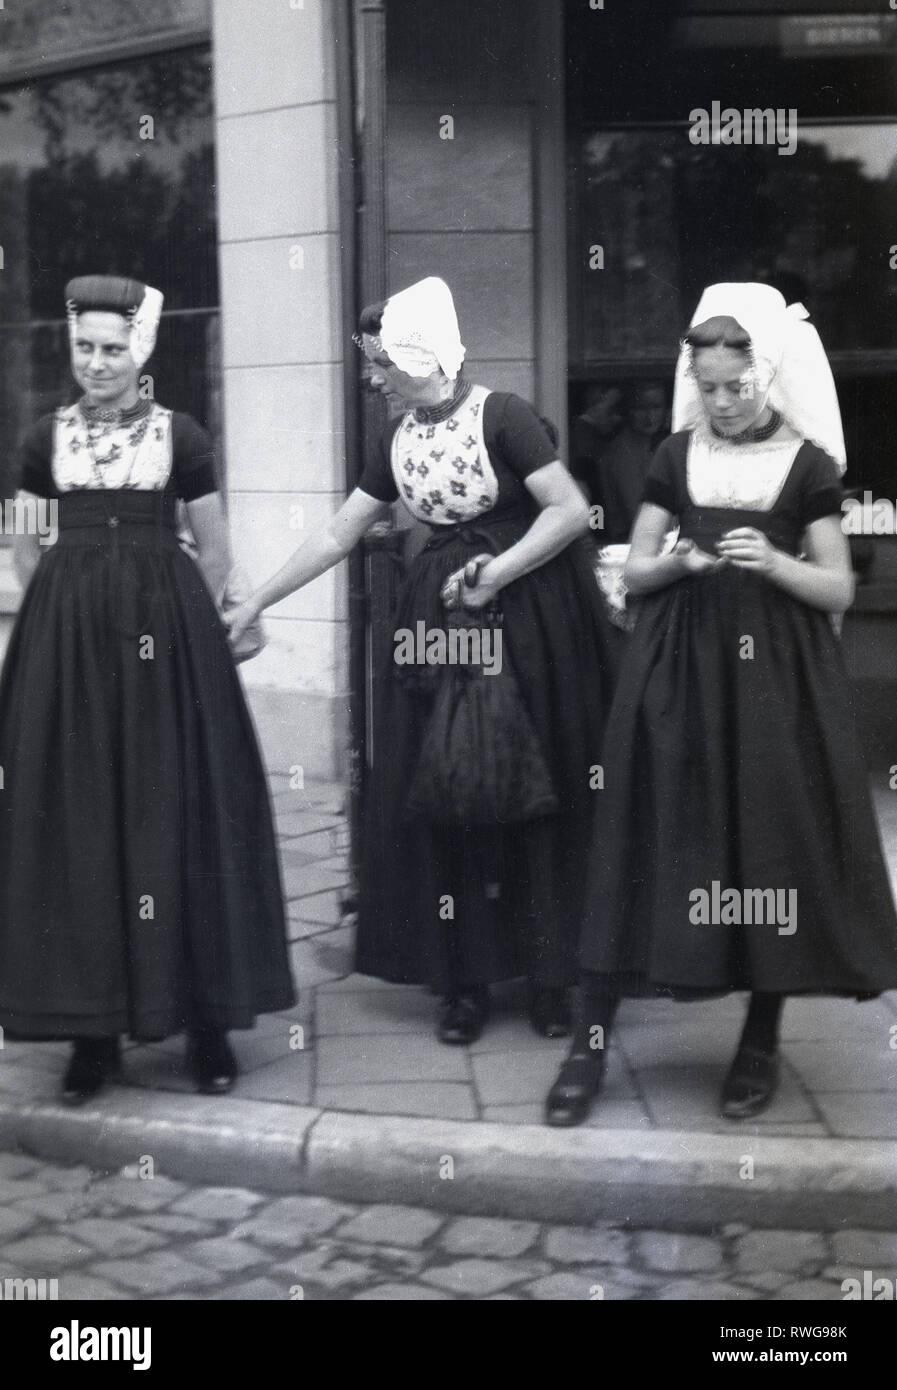 1950s, three women outside standing on a pavement wearing traditional ...